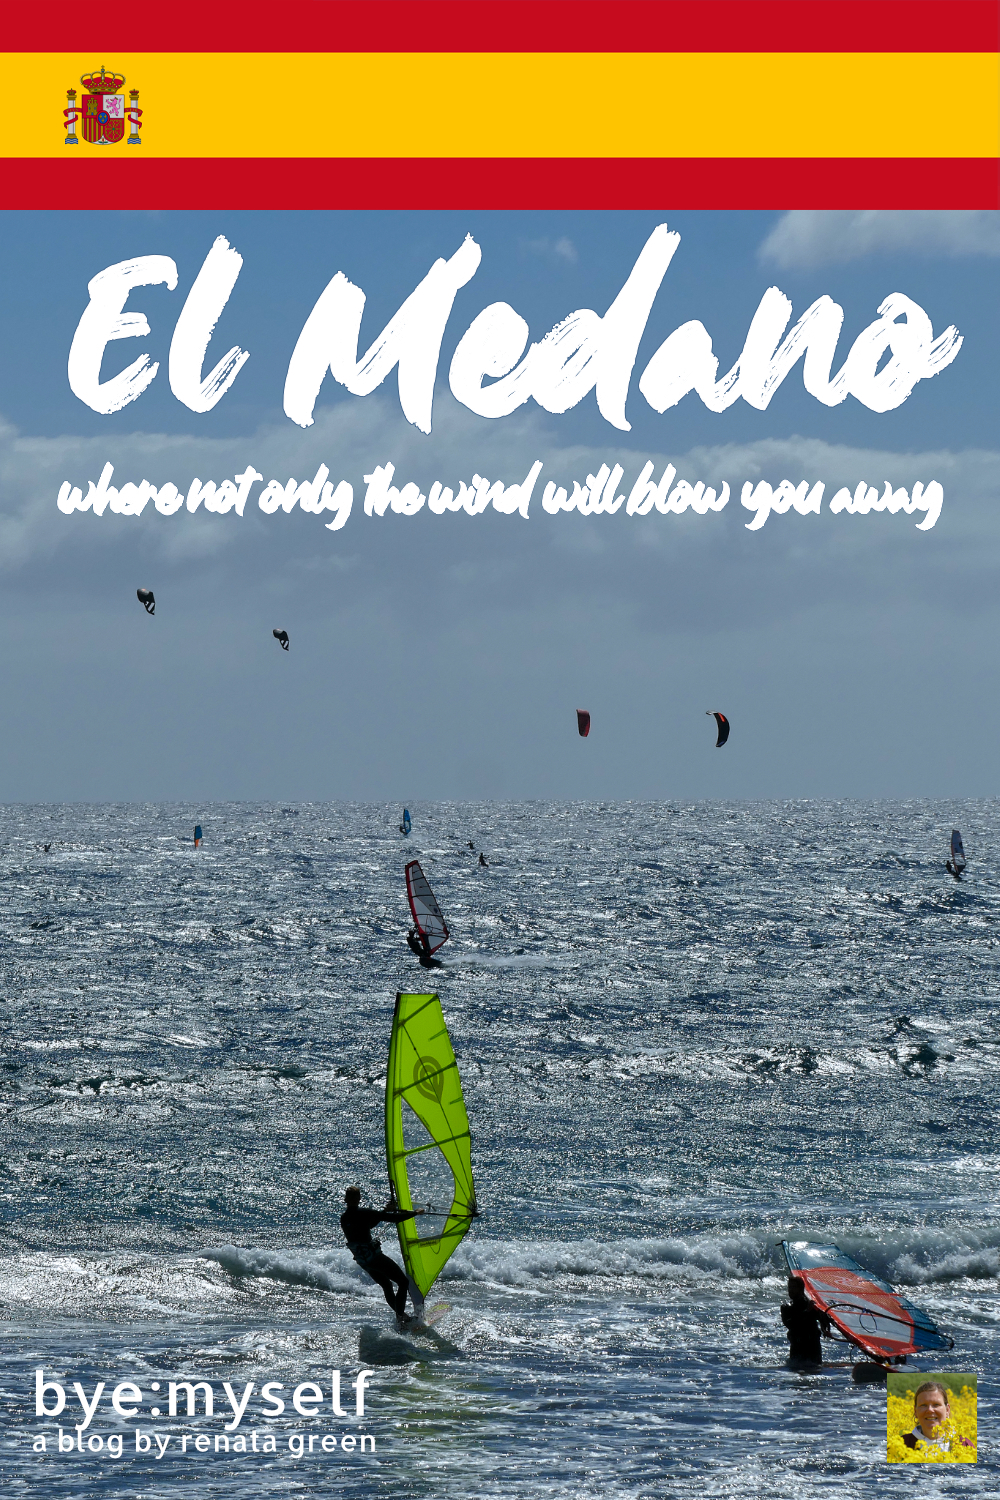 Pinnable Picture on the Post EL MEDANO - where not only the wind will blow you away